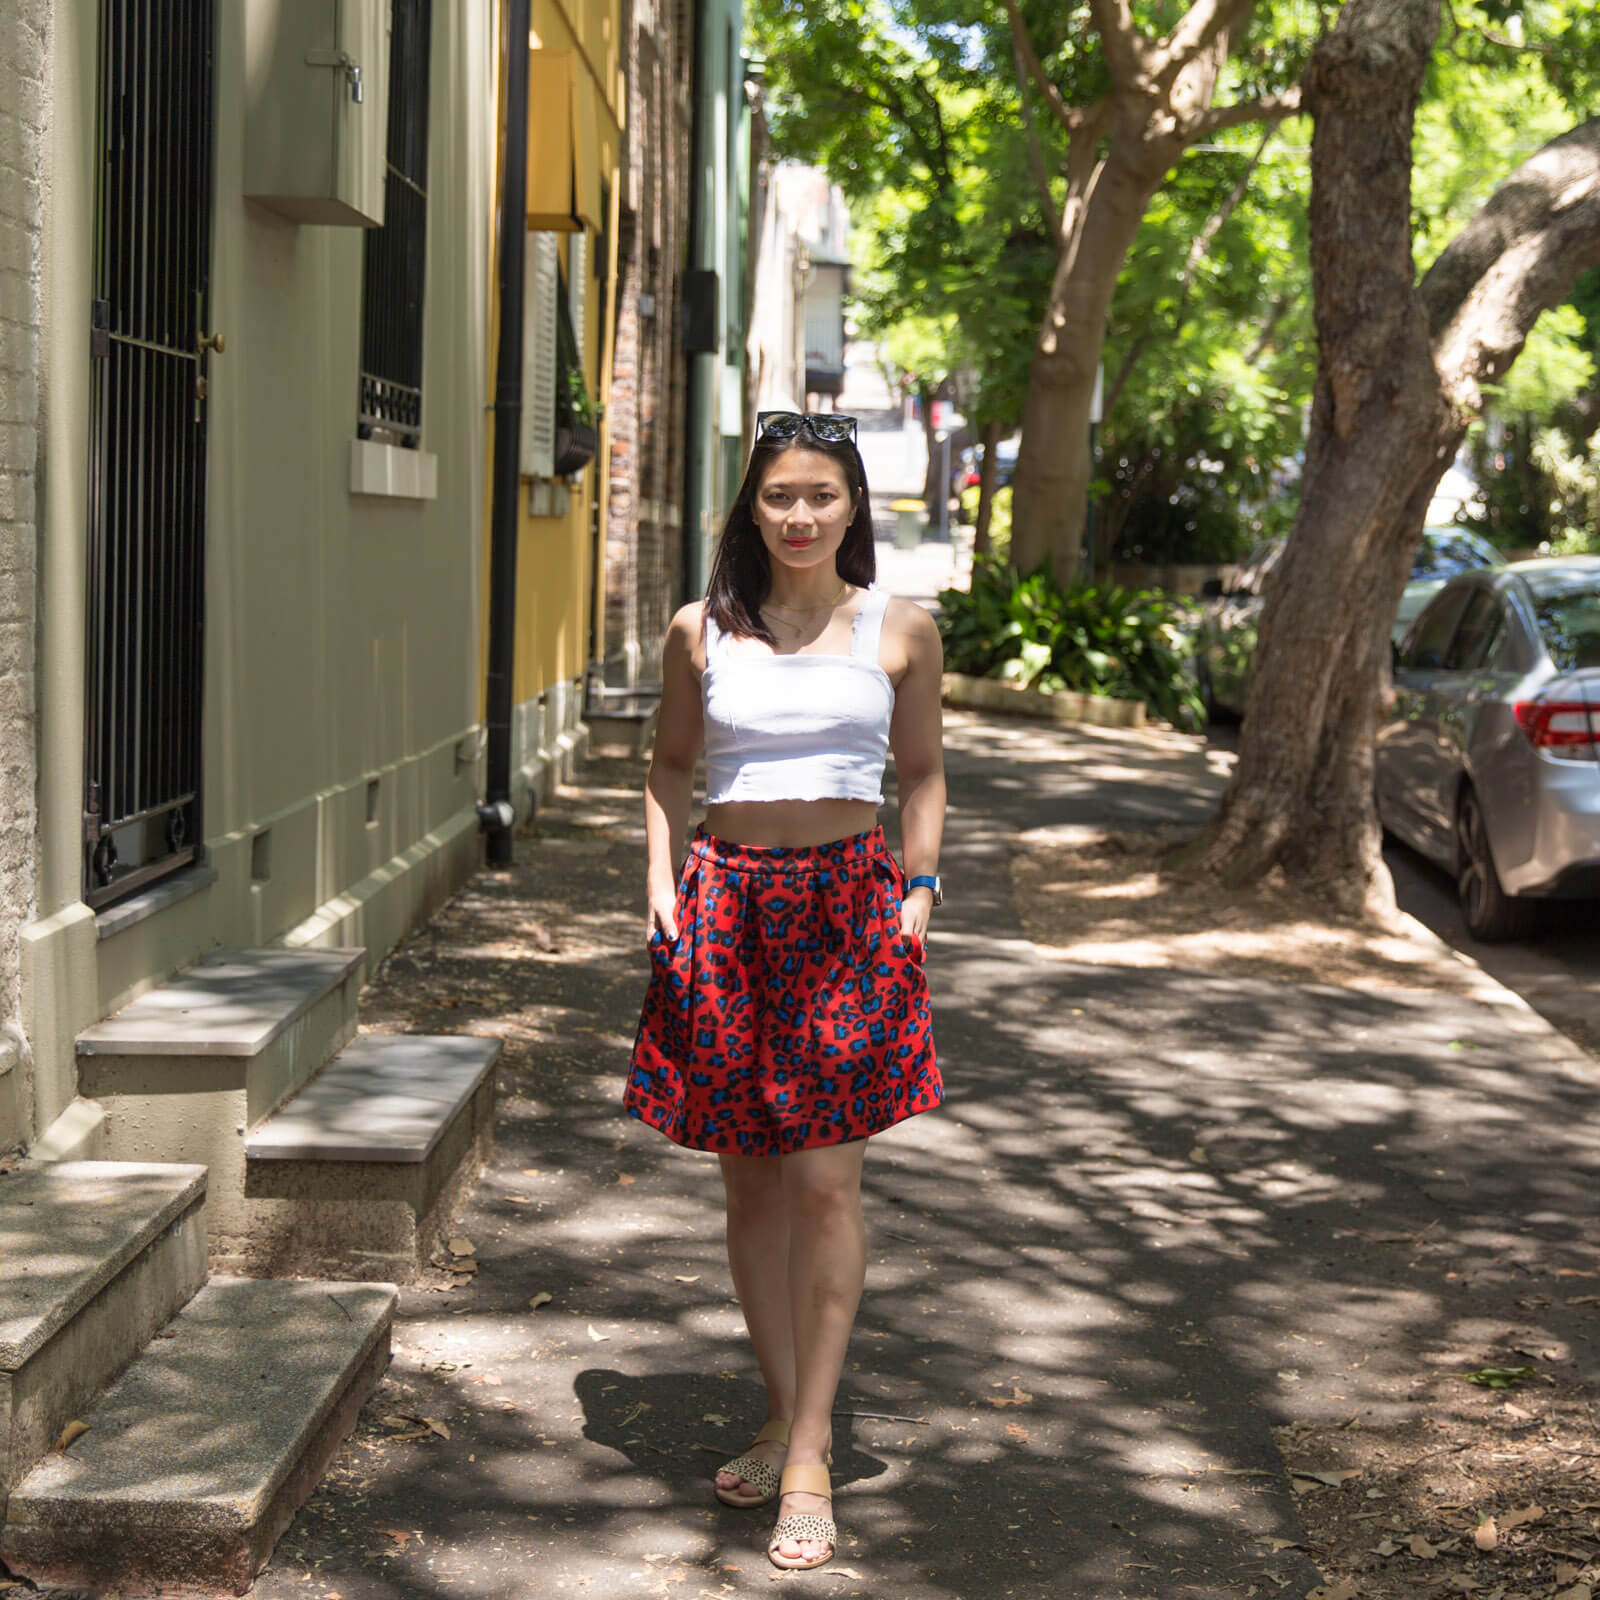 A woman standing on a footpath next to steps that lead up to the front door of houses. The area is shaded by trees. The woman has dark hair, and is wearing a white top with a red skirt with blue leopard sports. She has her hands slightly in the pockets of her skirt.